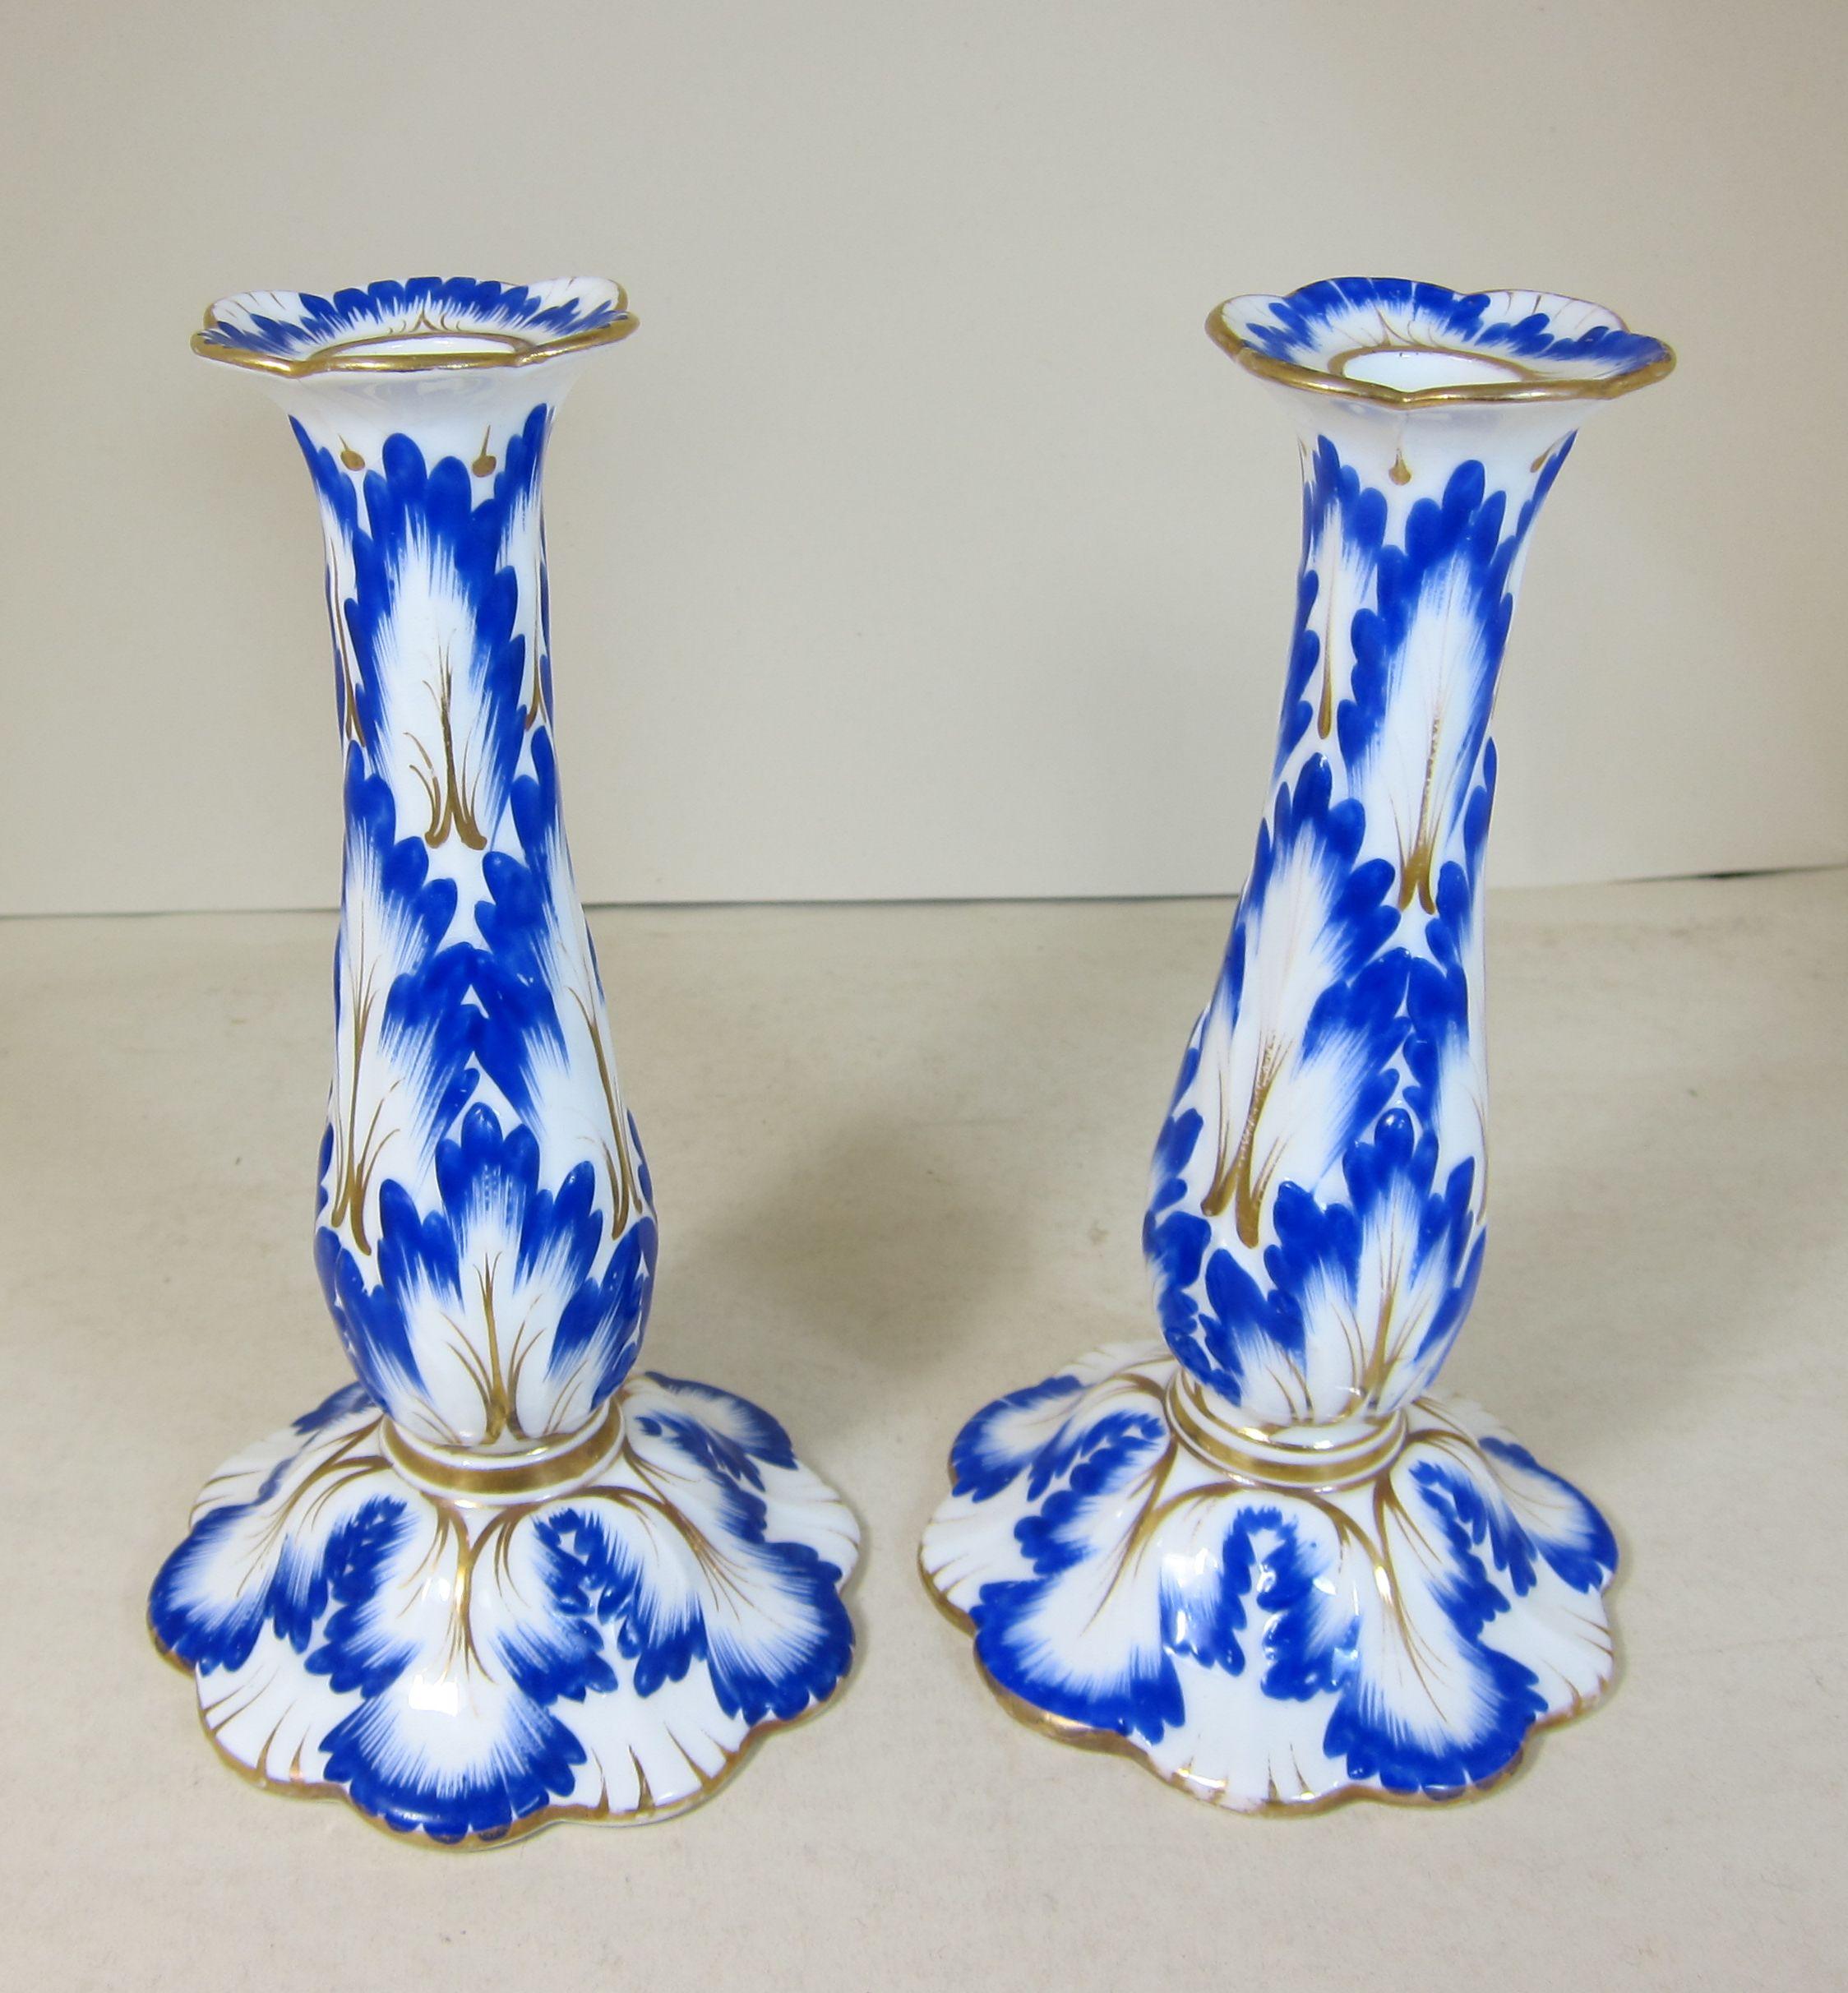 Pair of English Porcelain Candlesticks Decorated with Blue and Gilt Leaves 1